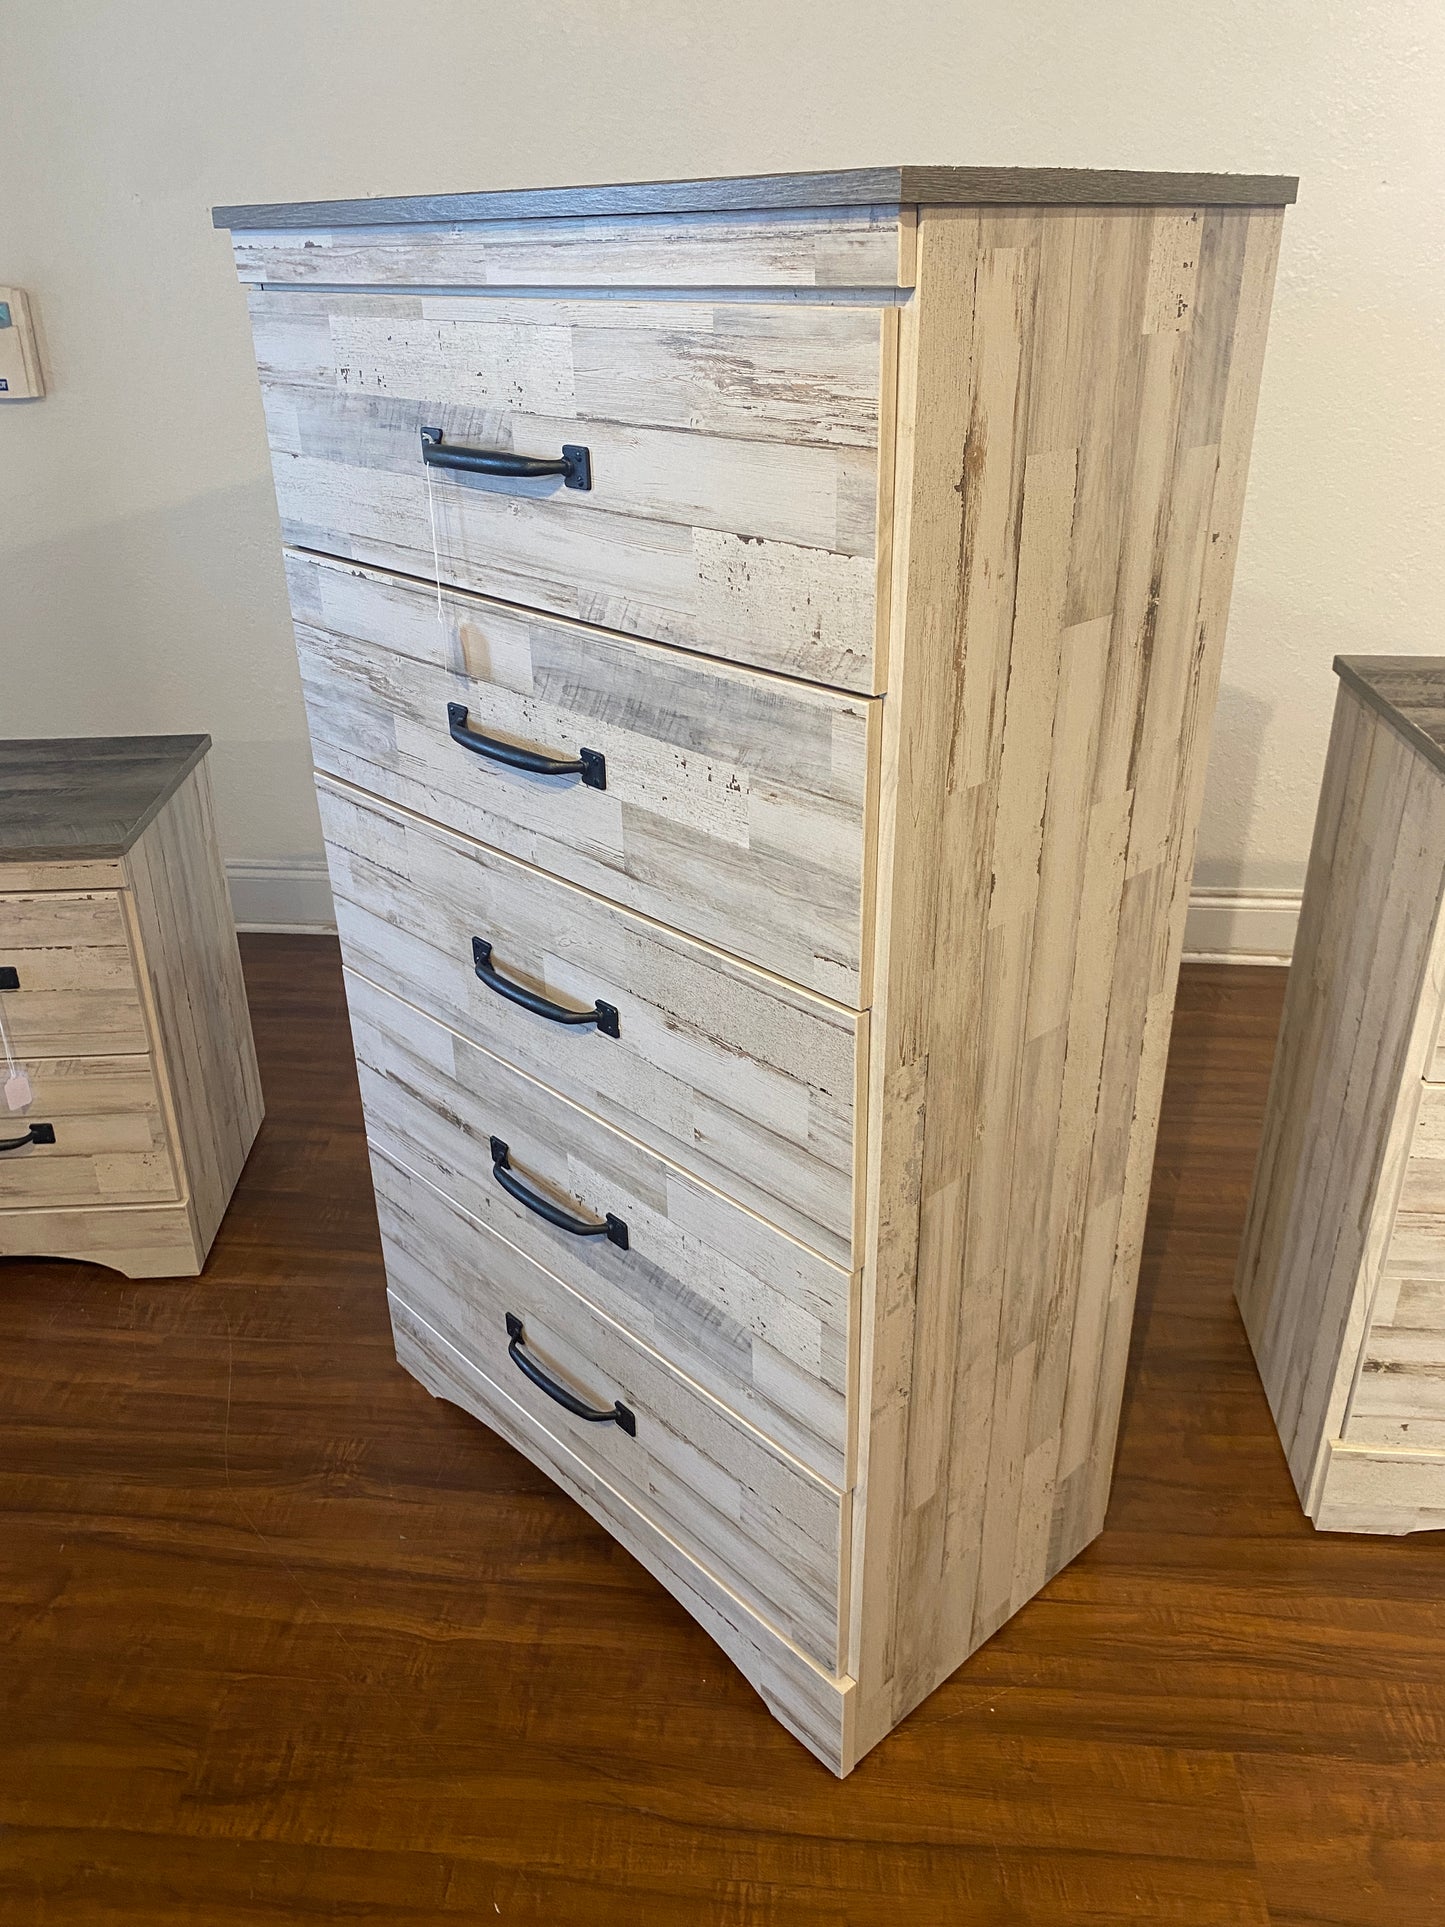 Brand new Pre-assembled, Made in USA, Coastal Rustic Aspen 5 Chest of Drawers